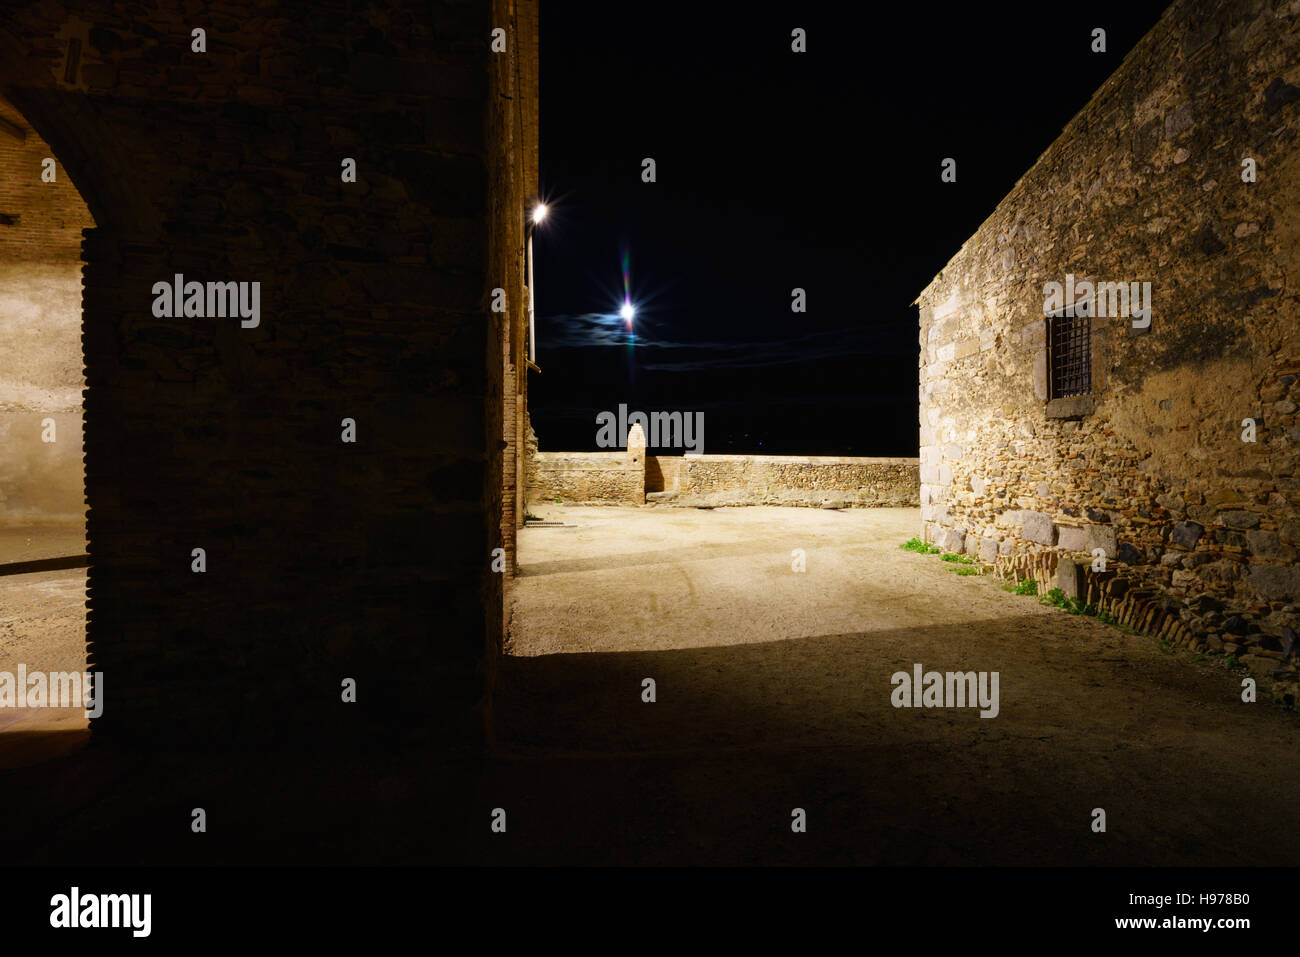 Medieval Town Night Photography Stock Photo